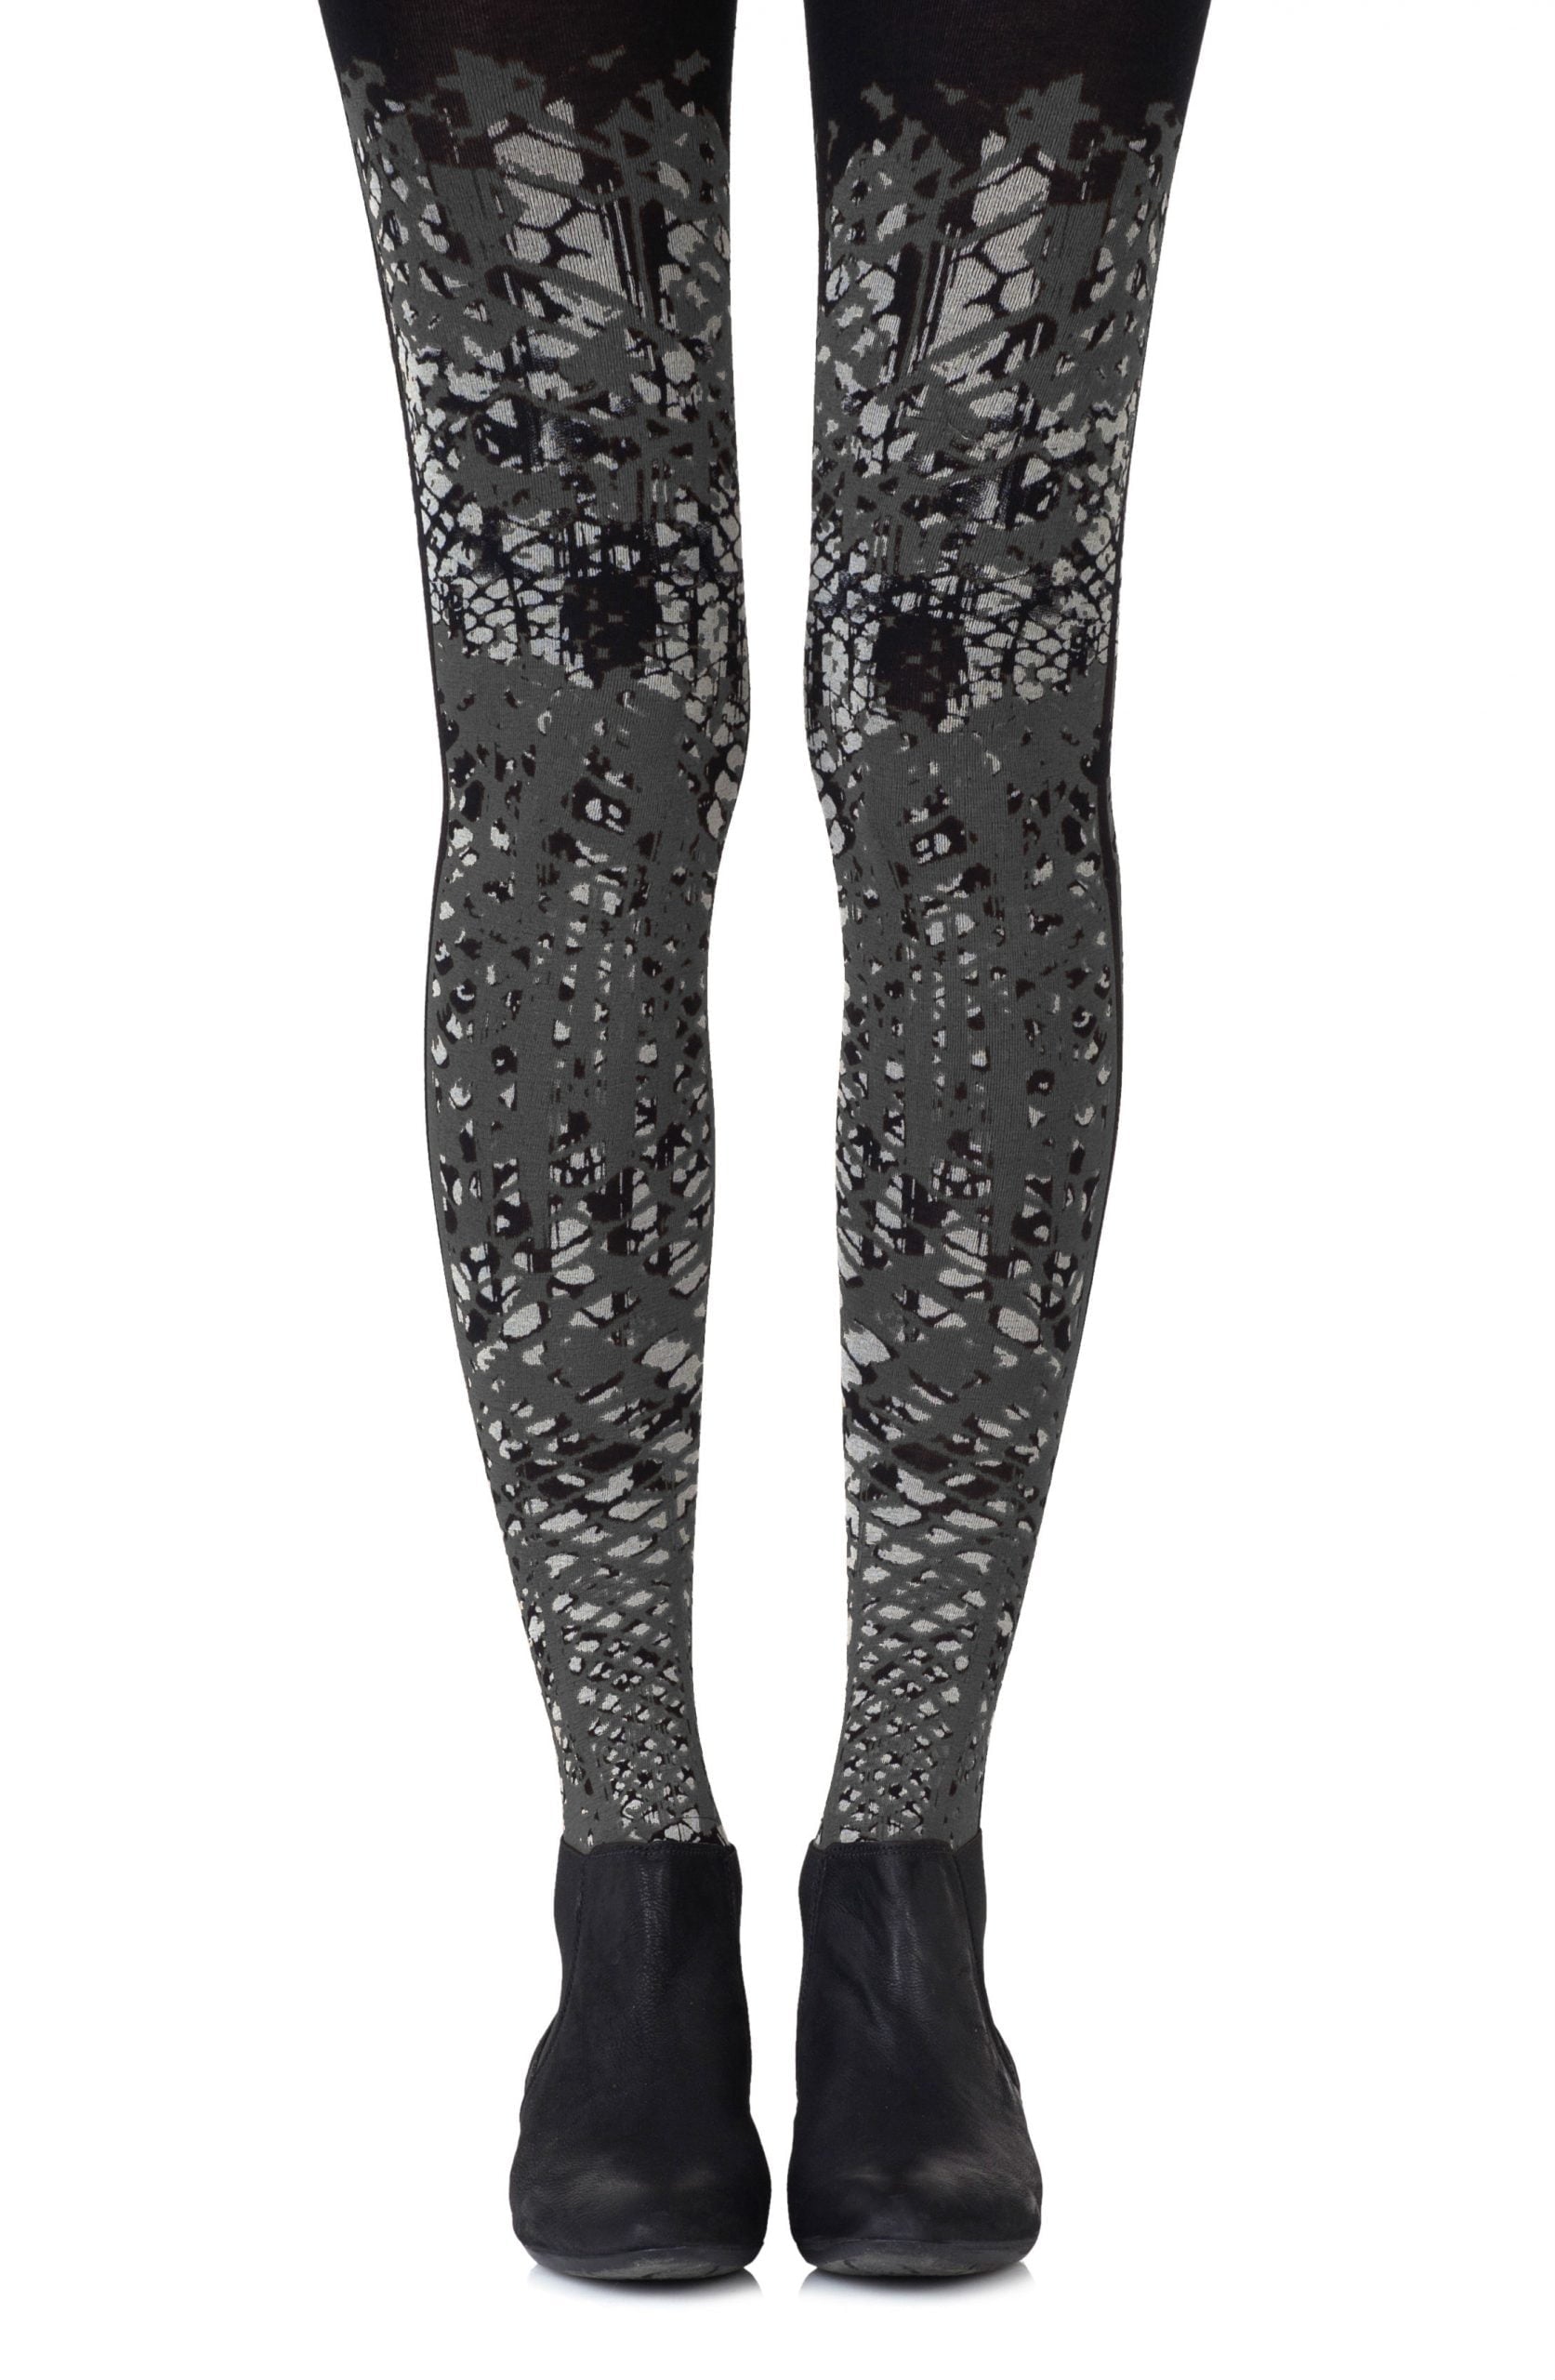 Zohara "Tip The Scale" Light Grey Print Tights-Katys Boutique